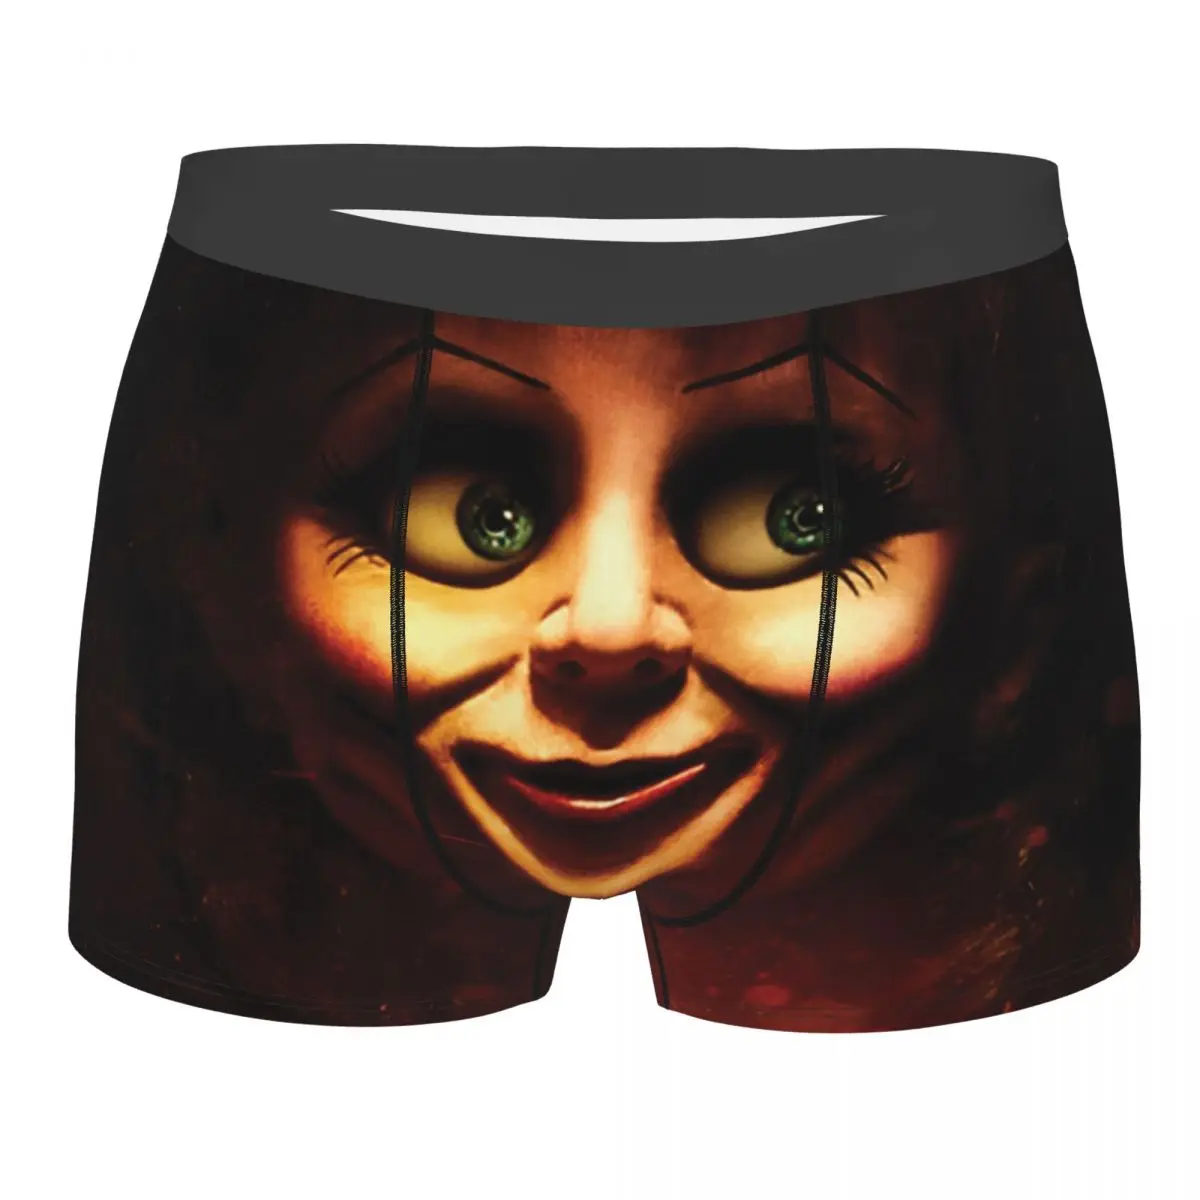 

Novelty Annabelle Boxers Shorts Panties Men's Underpants Stretch Halloween Horror Movie Character Briefs Underwear